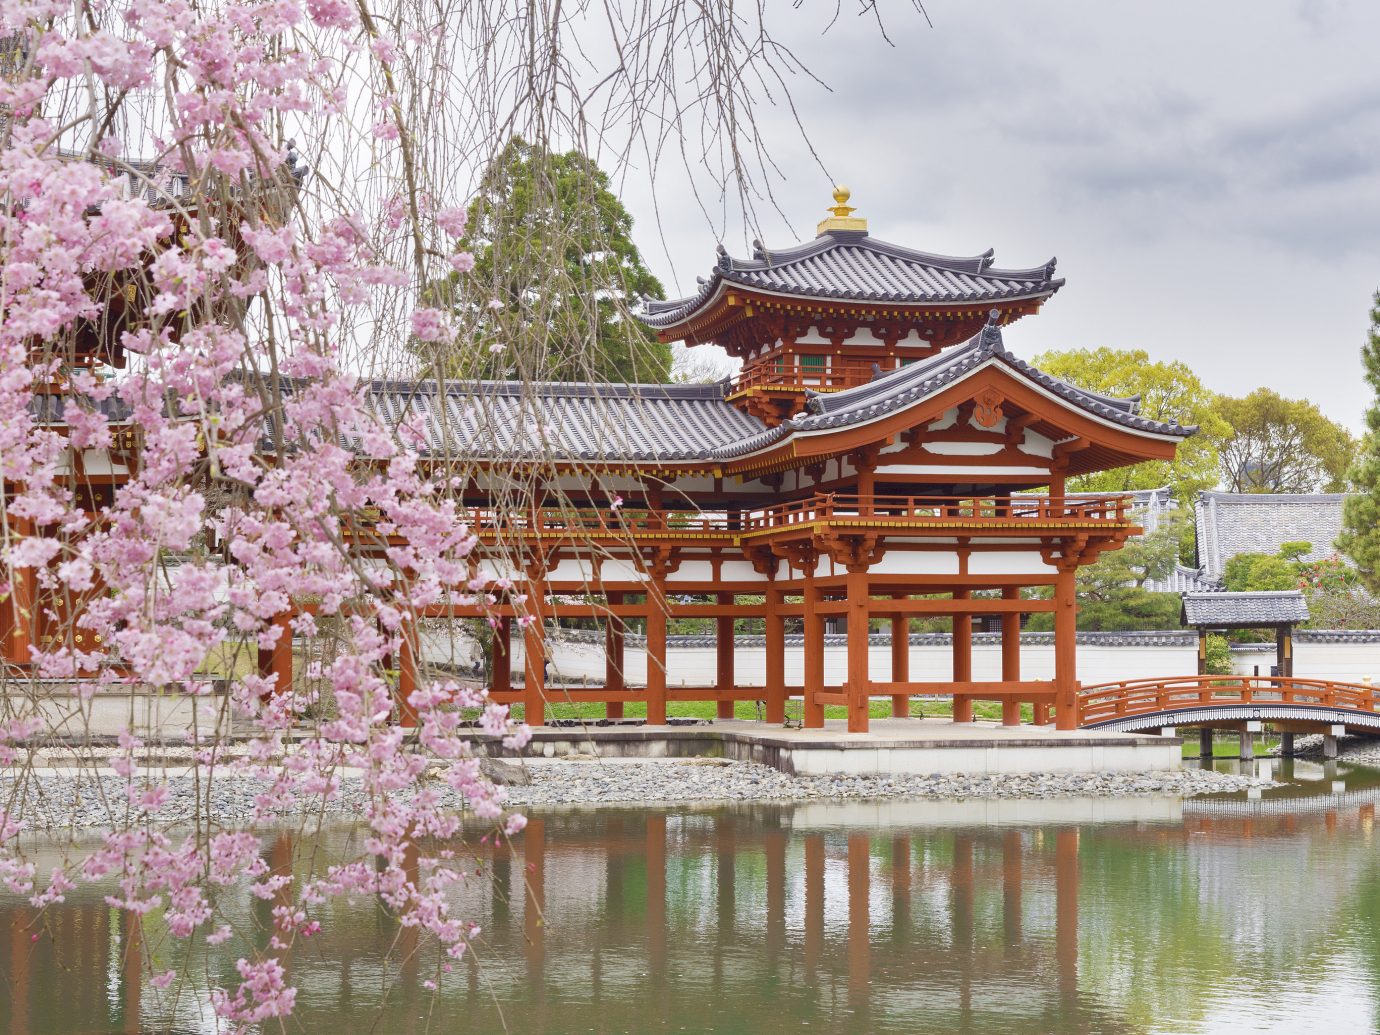 Japan Trip Ideas chinese architecture japanese architecture plant flower shinto shrine pagoda tree reflection cherry blossom outdoor structure temple pavilion shrine spring pond gazebo leisure